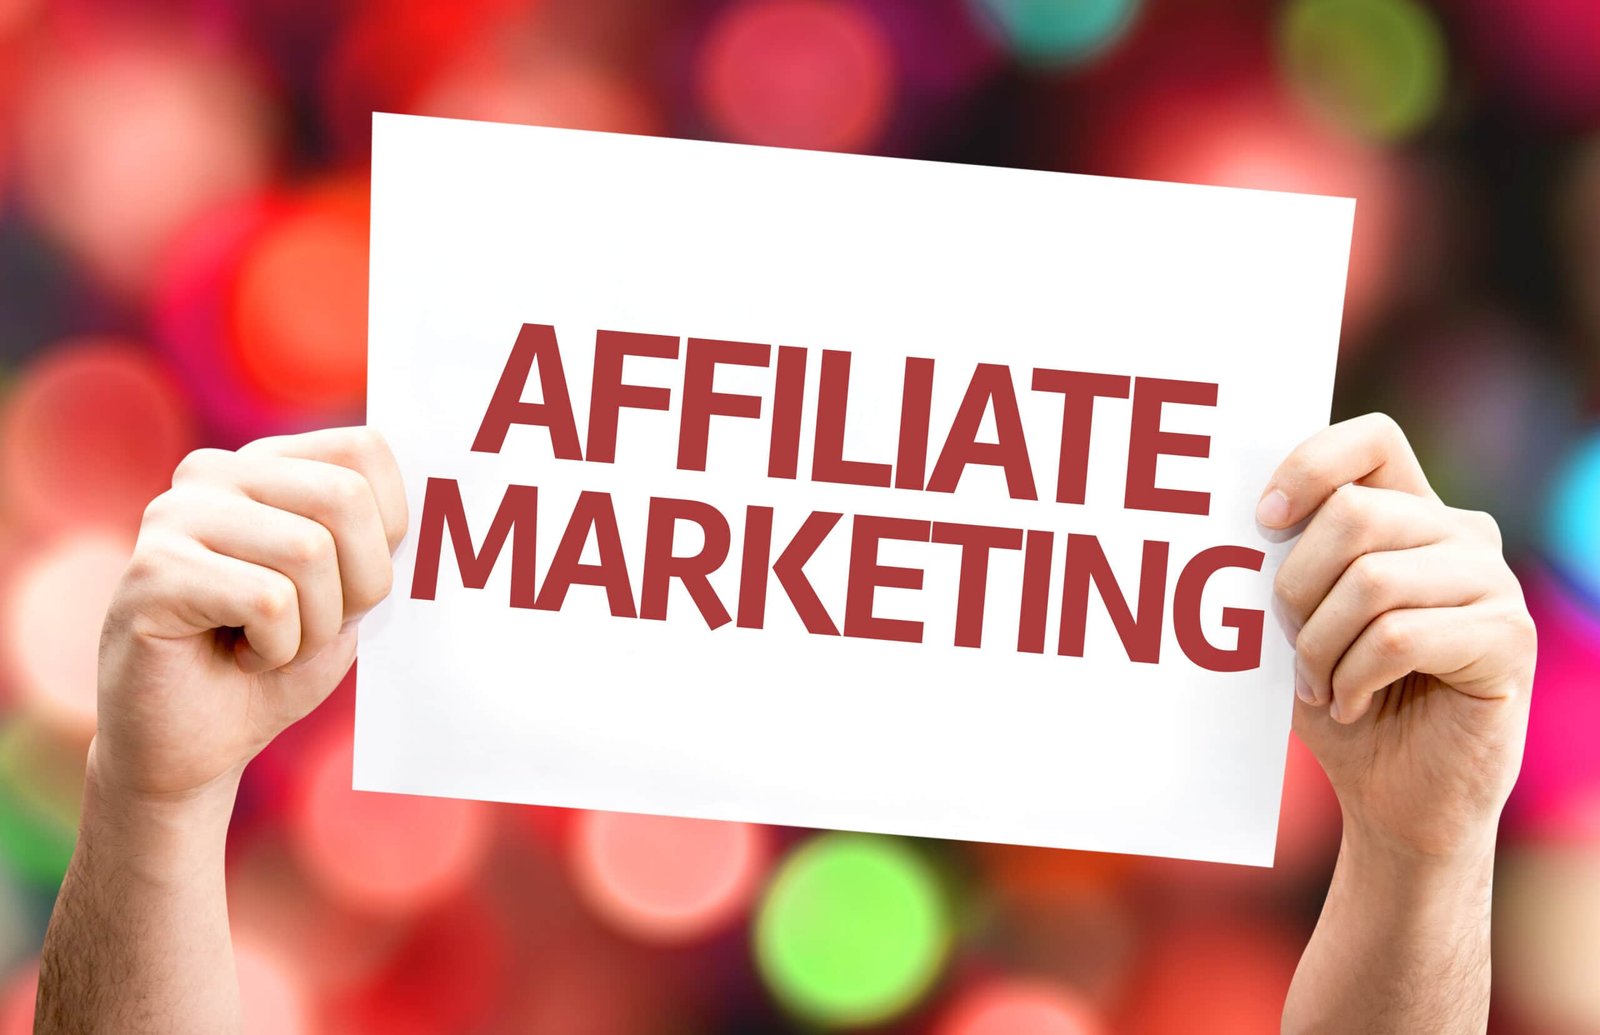 14 Deadly Sins of Affiliate Marketing